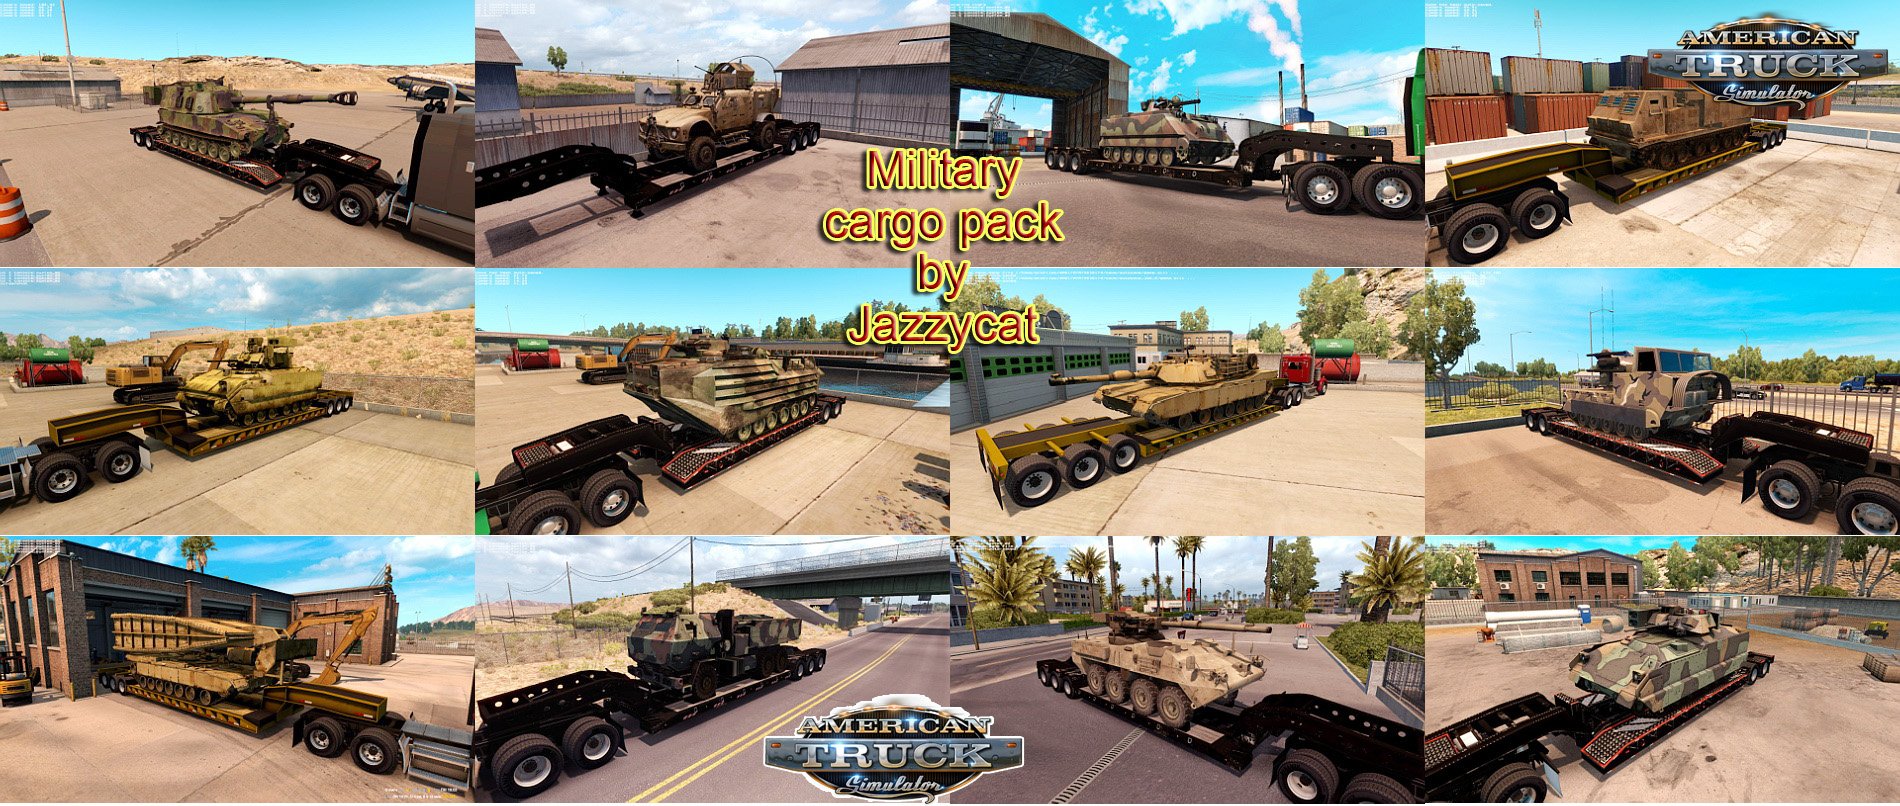 Military Cargo Pack v1.0.2 by Jazzycat